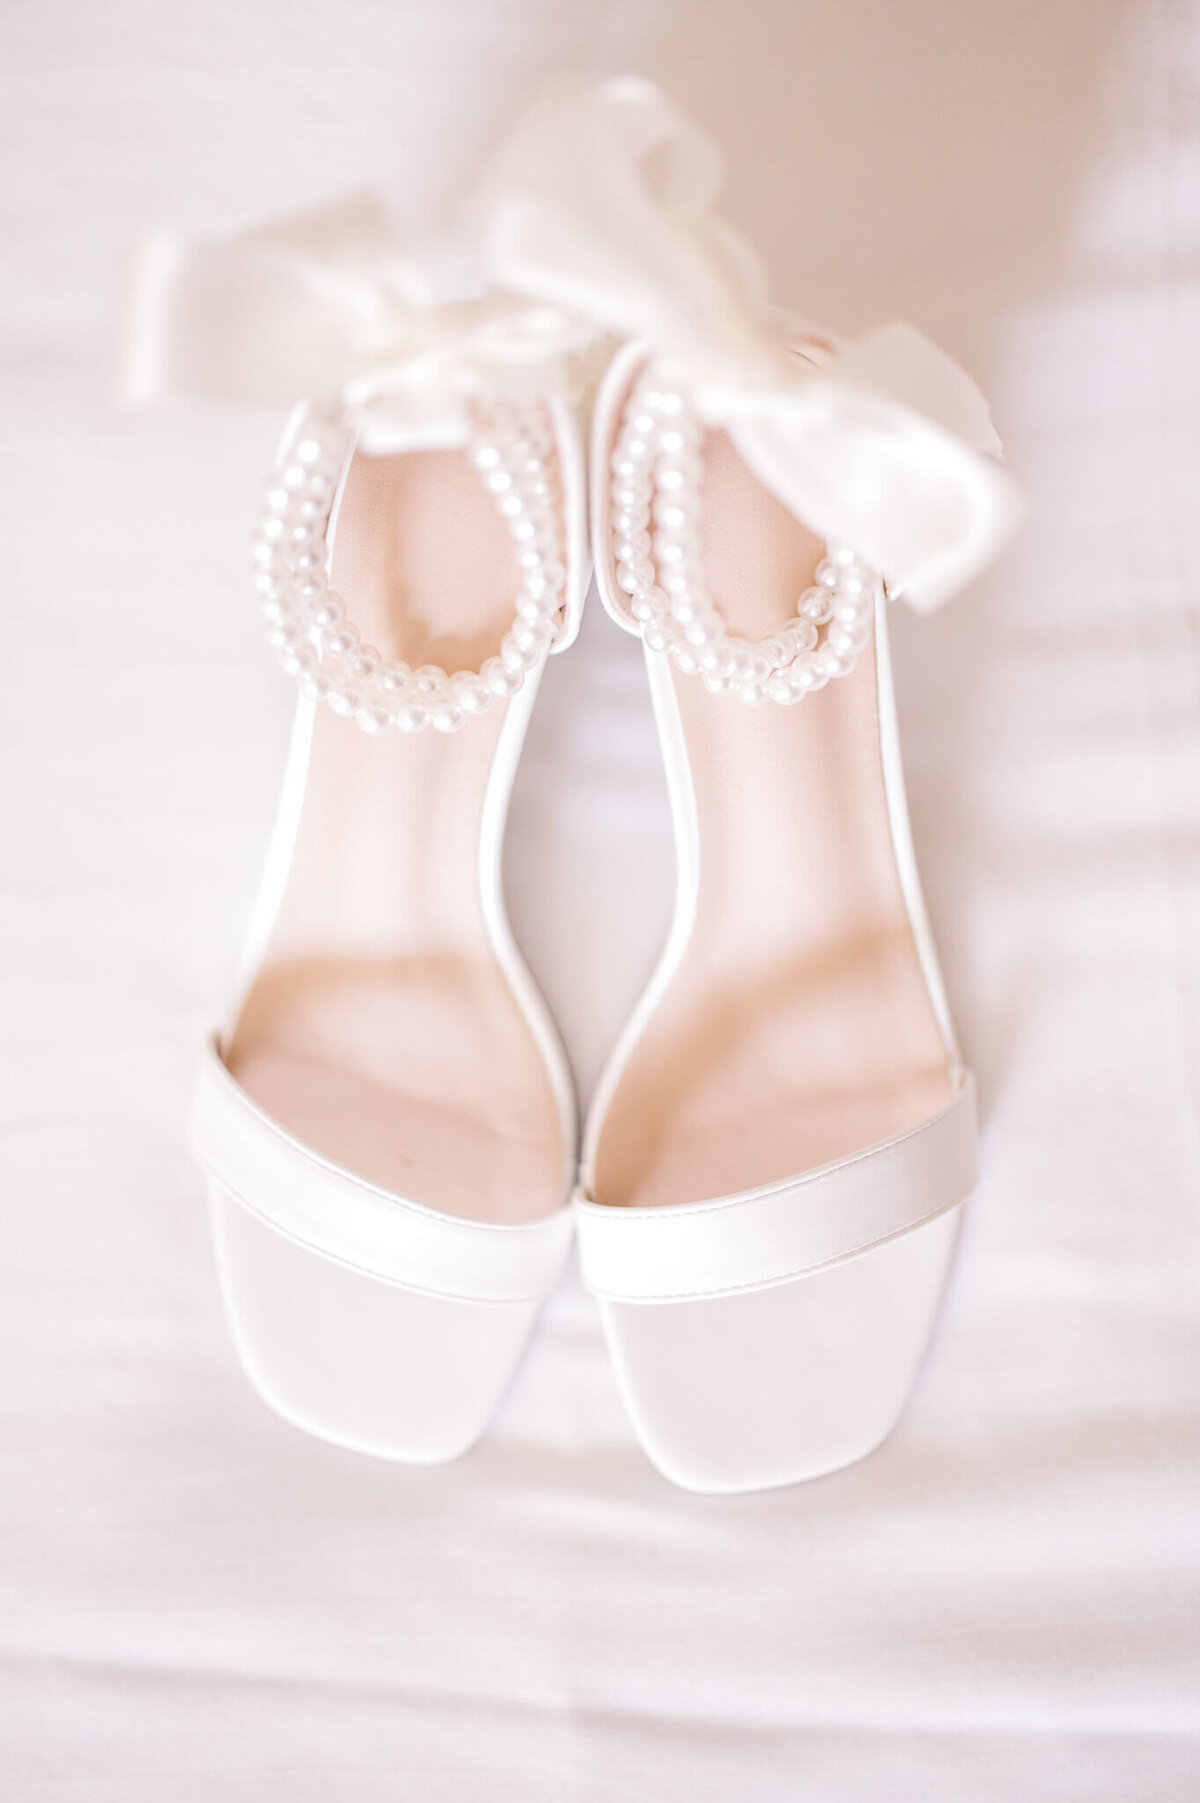 Detail photo of wedding shoes